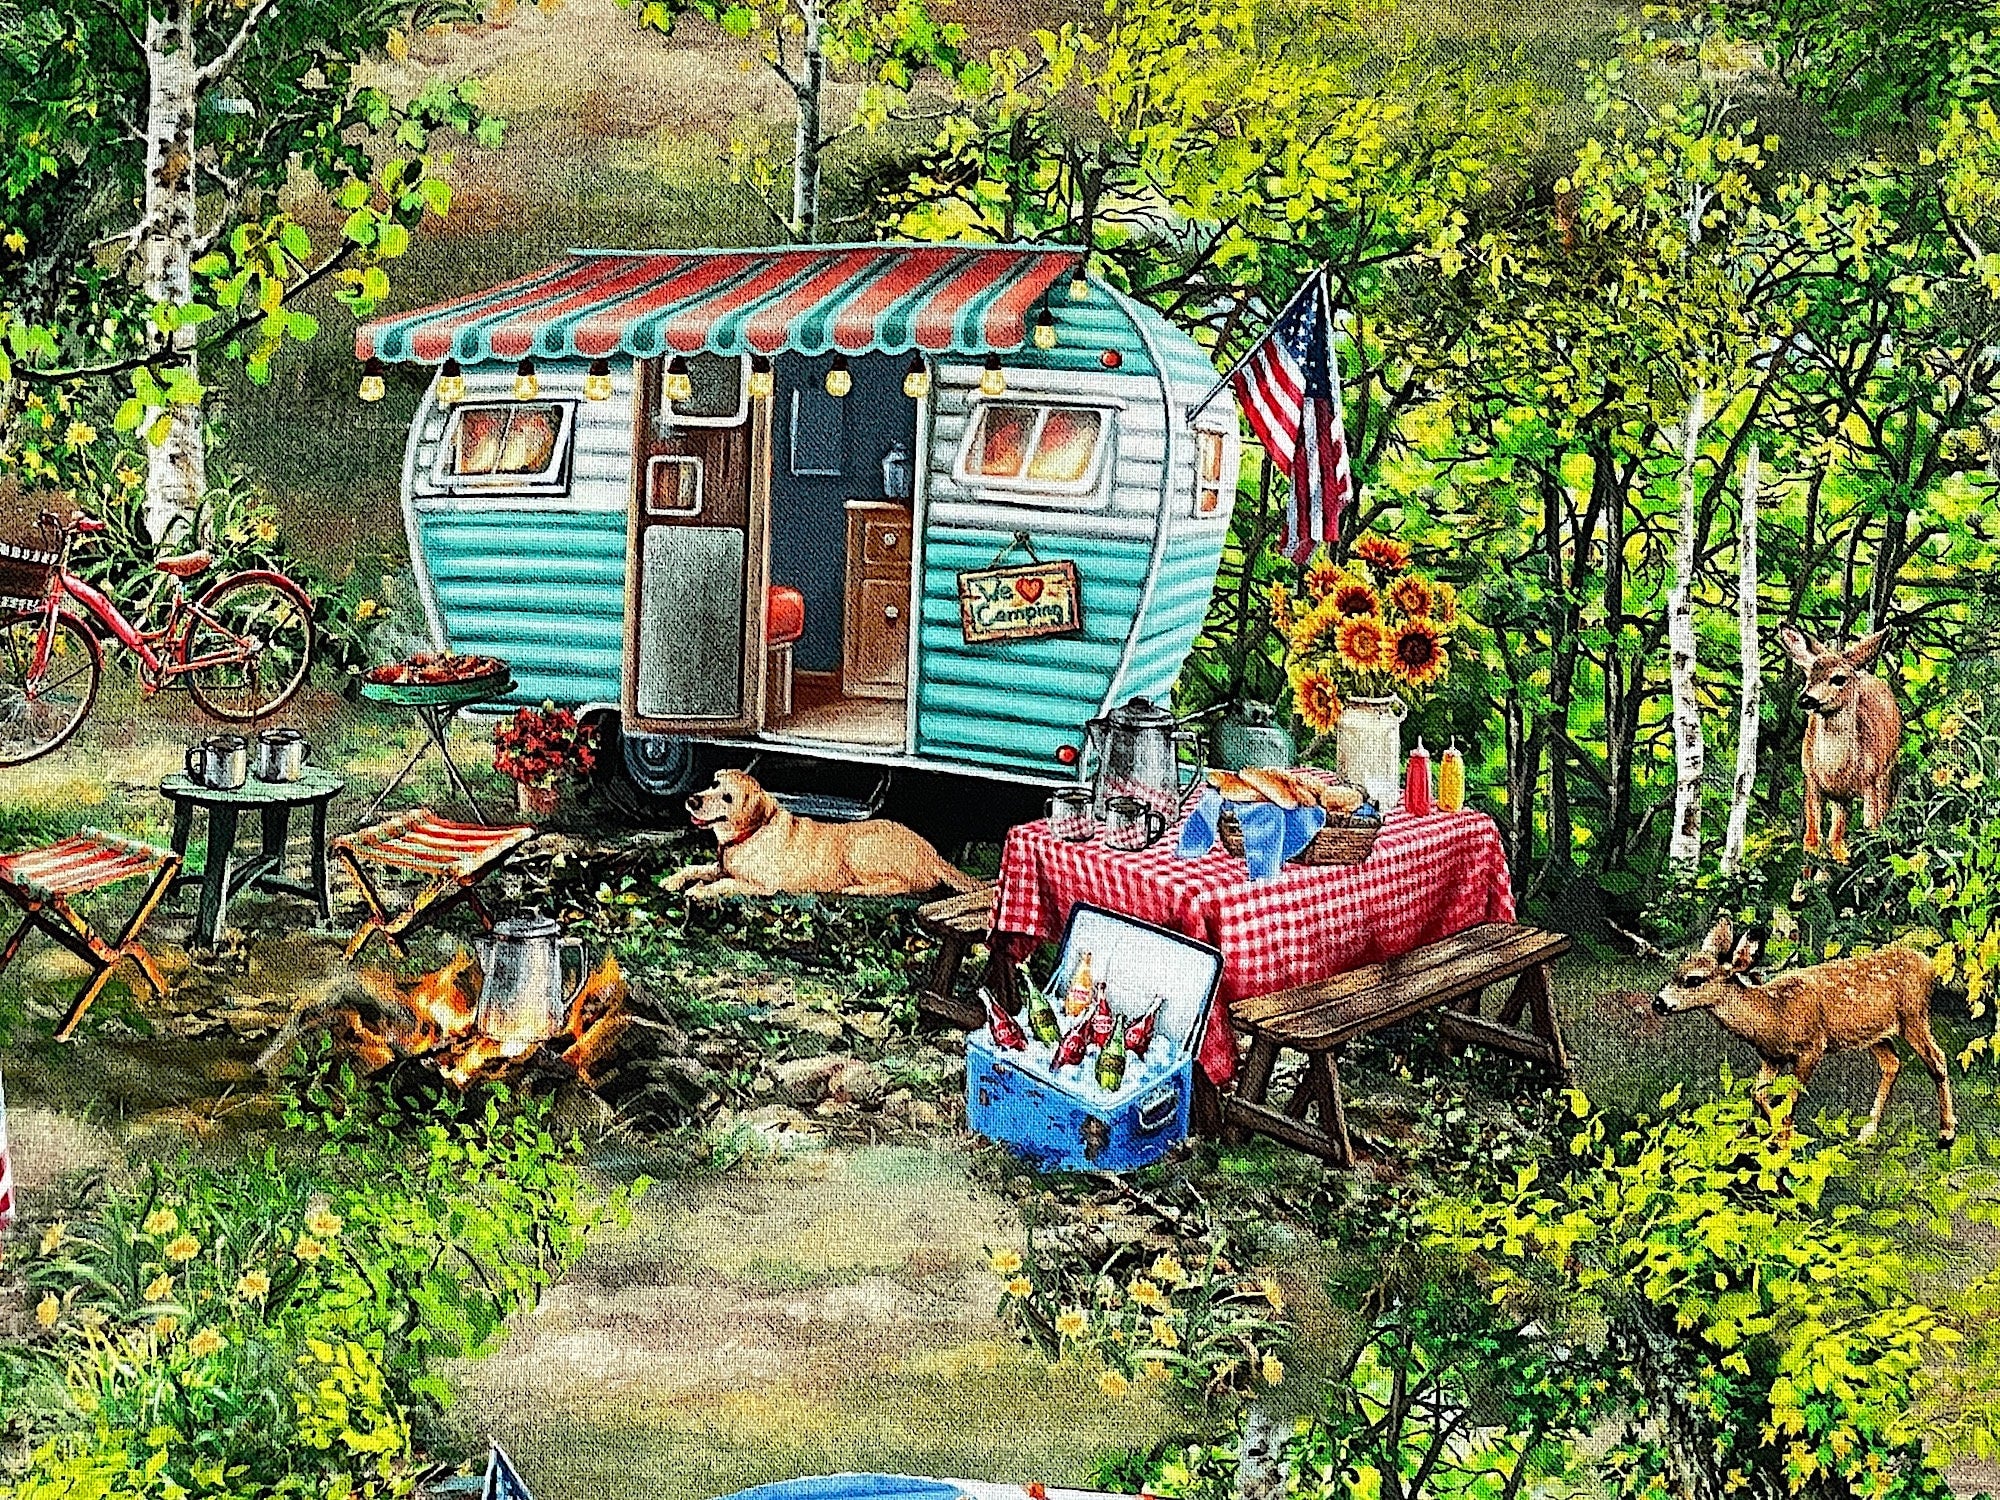 Close up of a camping scene that has a travel trailer, deer, picnic table, cooler filled with beverages and more.